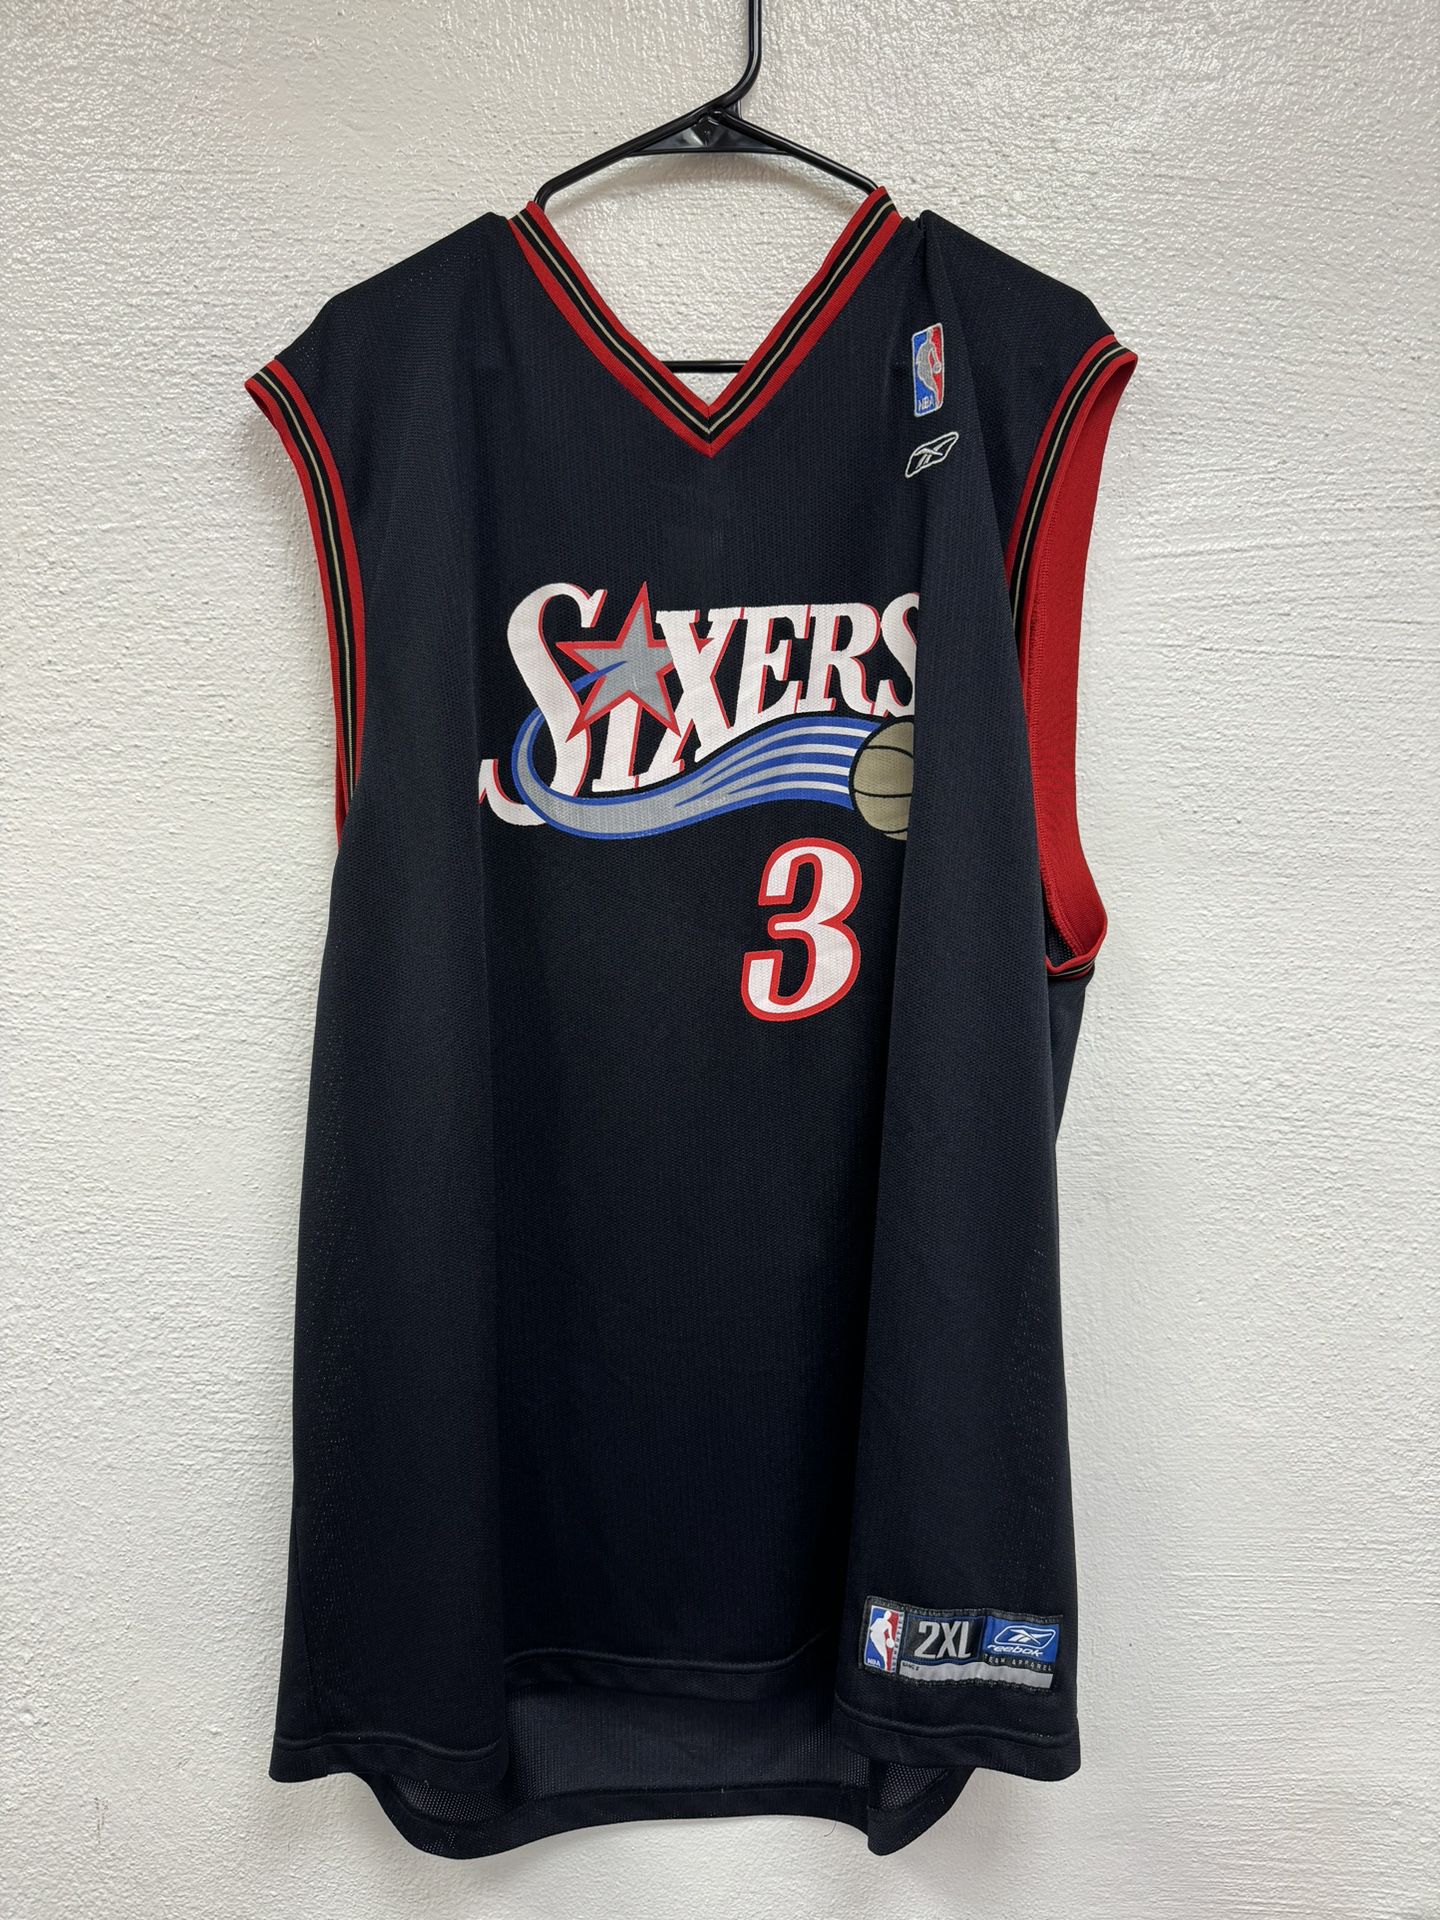 Black sixers Iverson Jersey